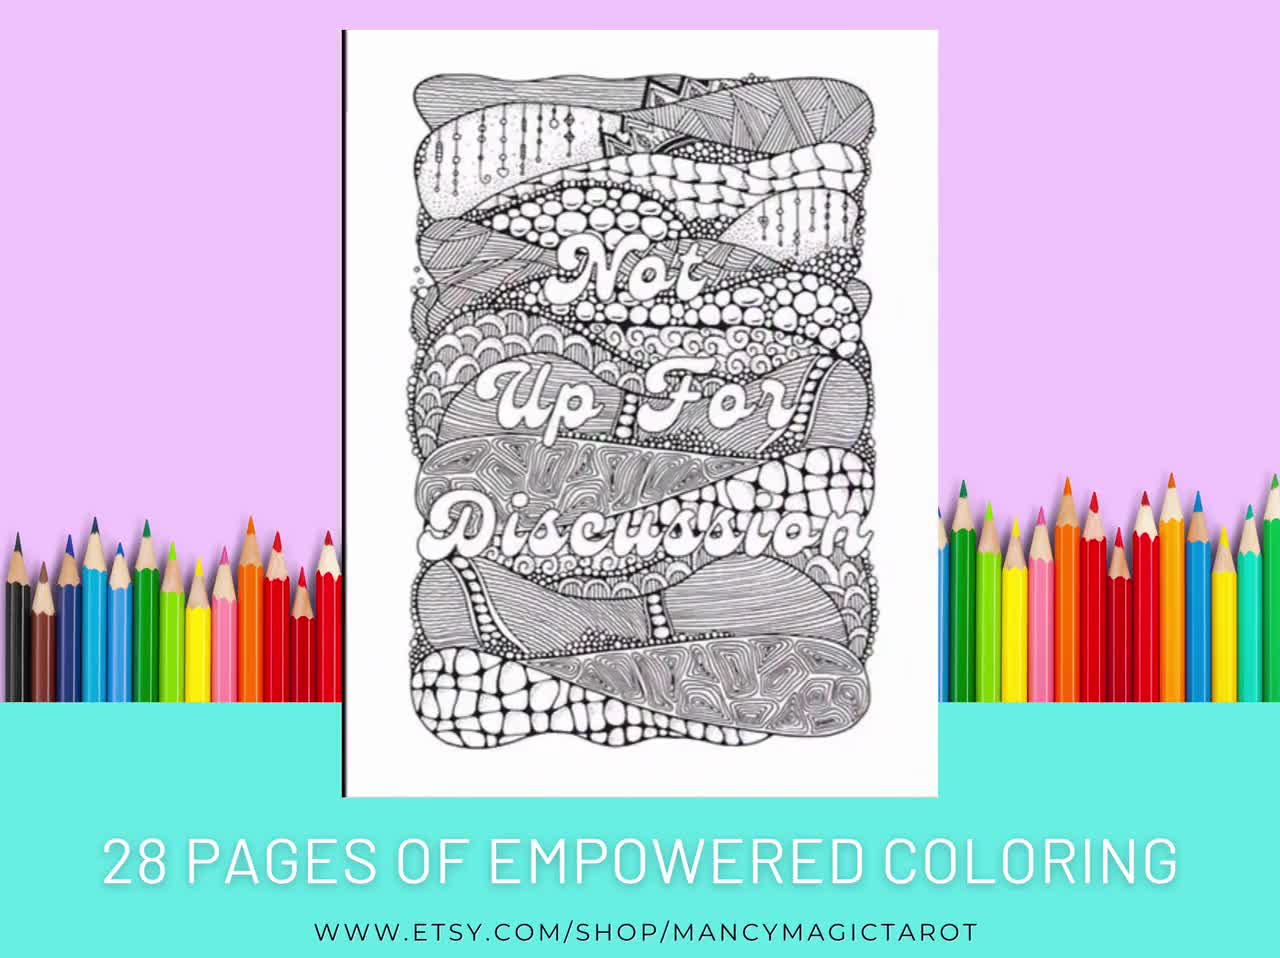 A place to post, discuss, gift adult coloring books